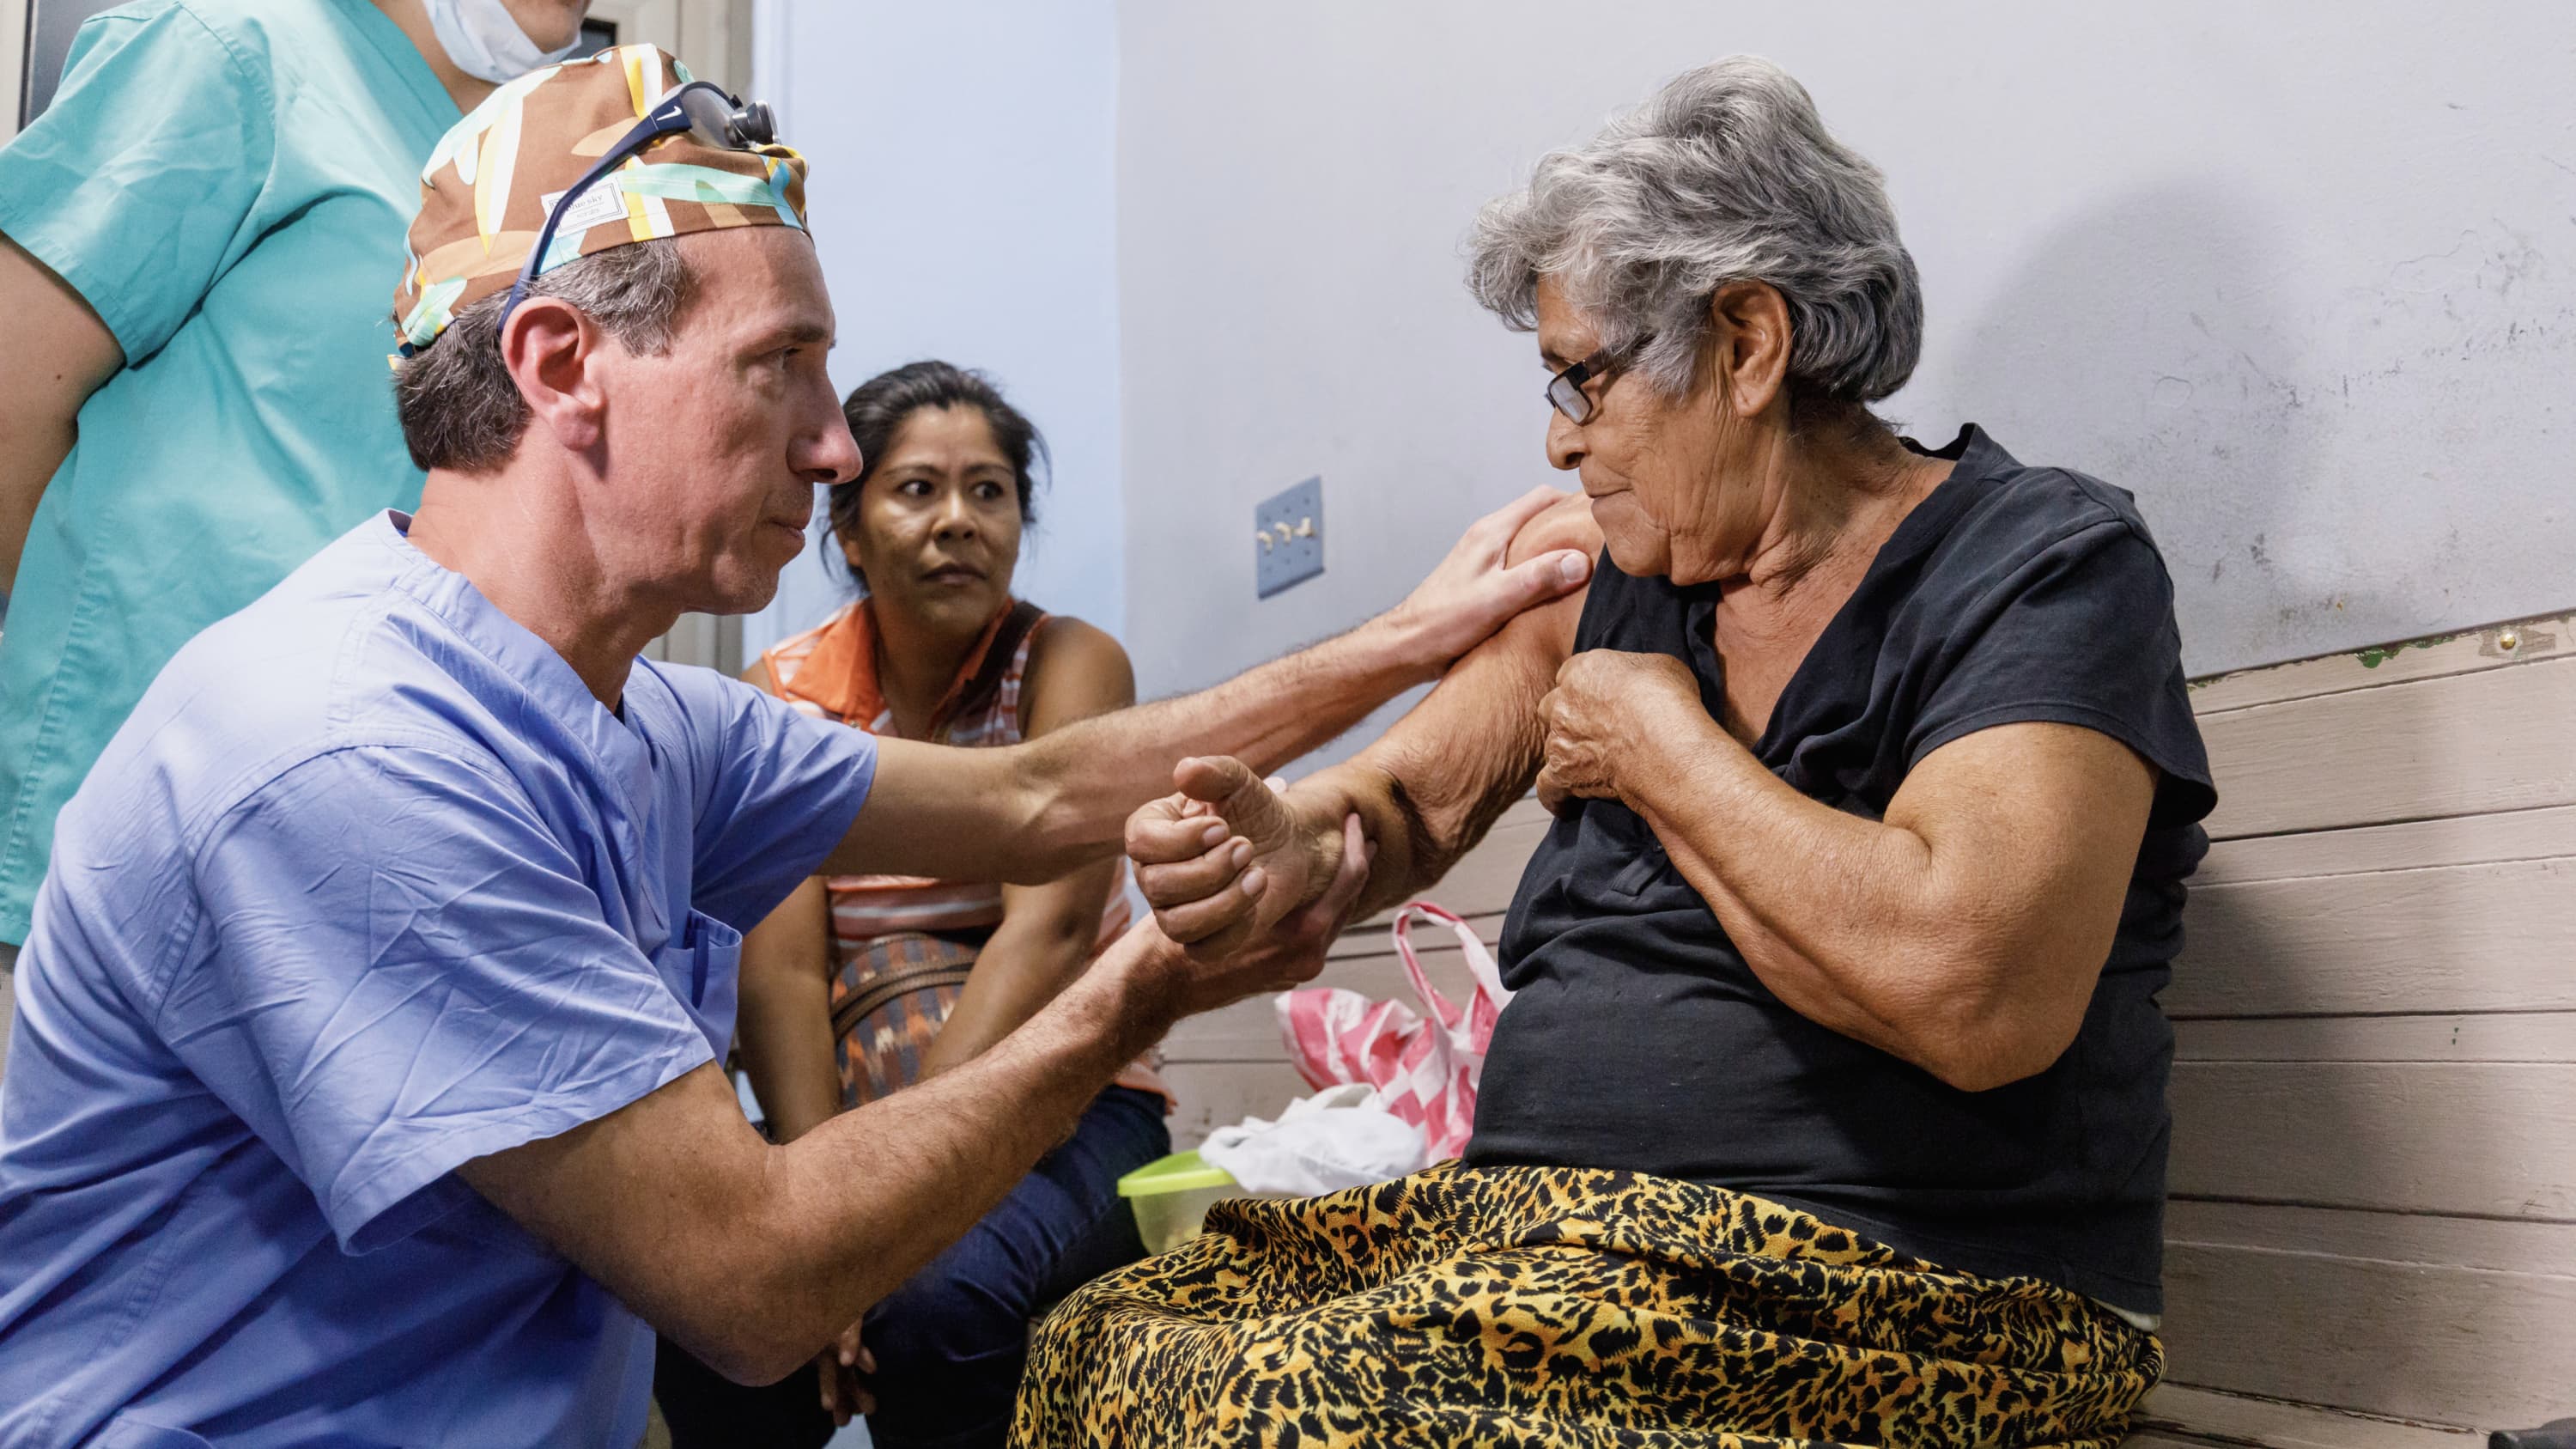 A doctor gently examines an elderly woman's arm and shoulder